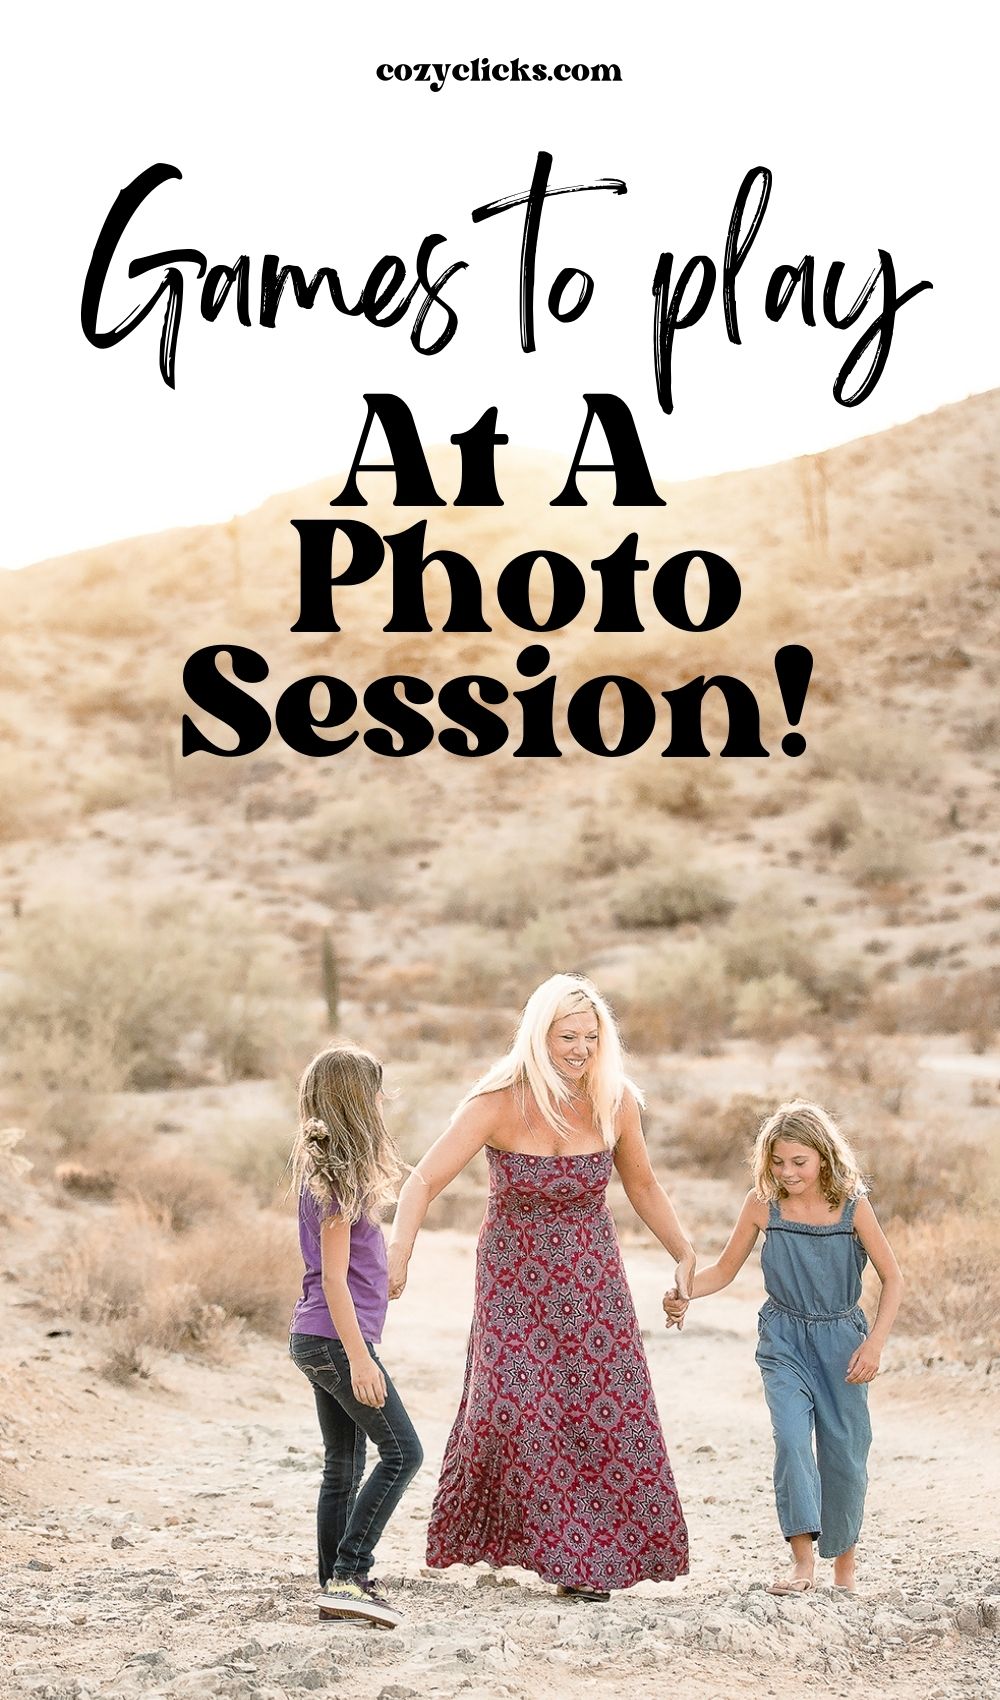 Games to play at photo sessions when kids are little or won't cooperate! Simple games for photo shoots to make things fun and enjoyable! Photography tips for portrait photographers